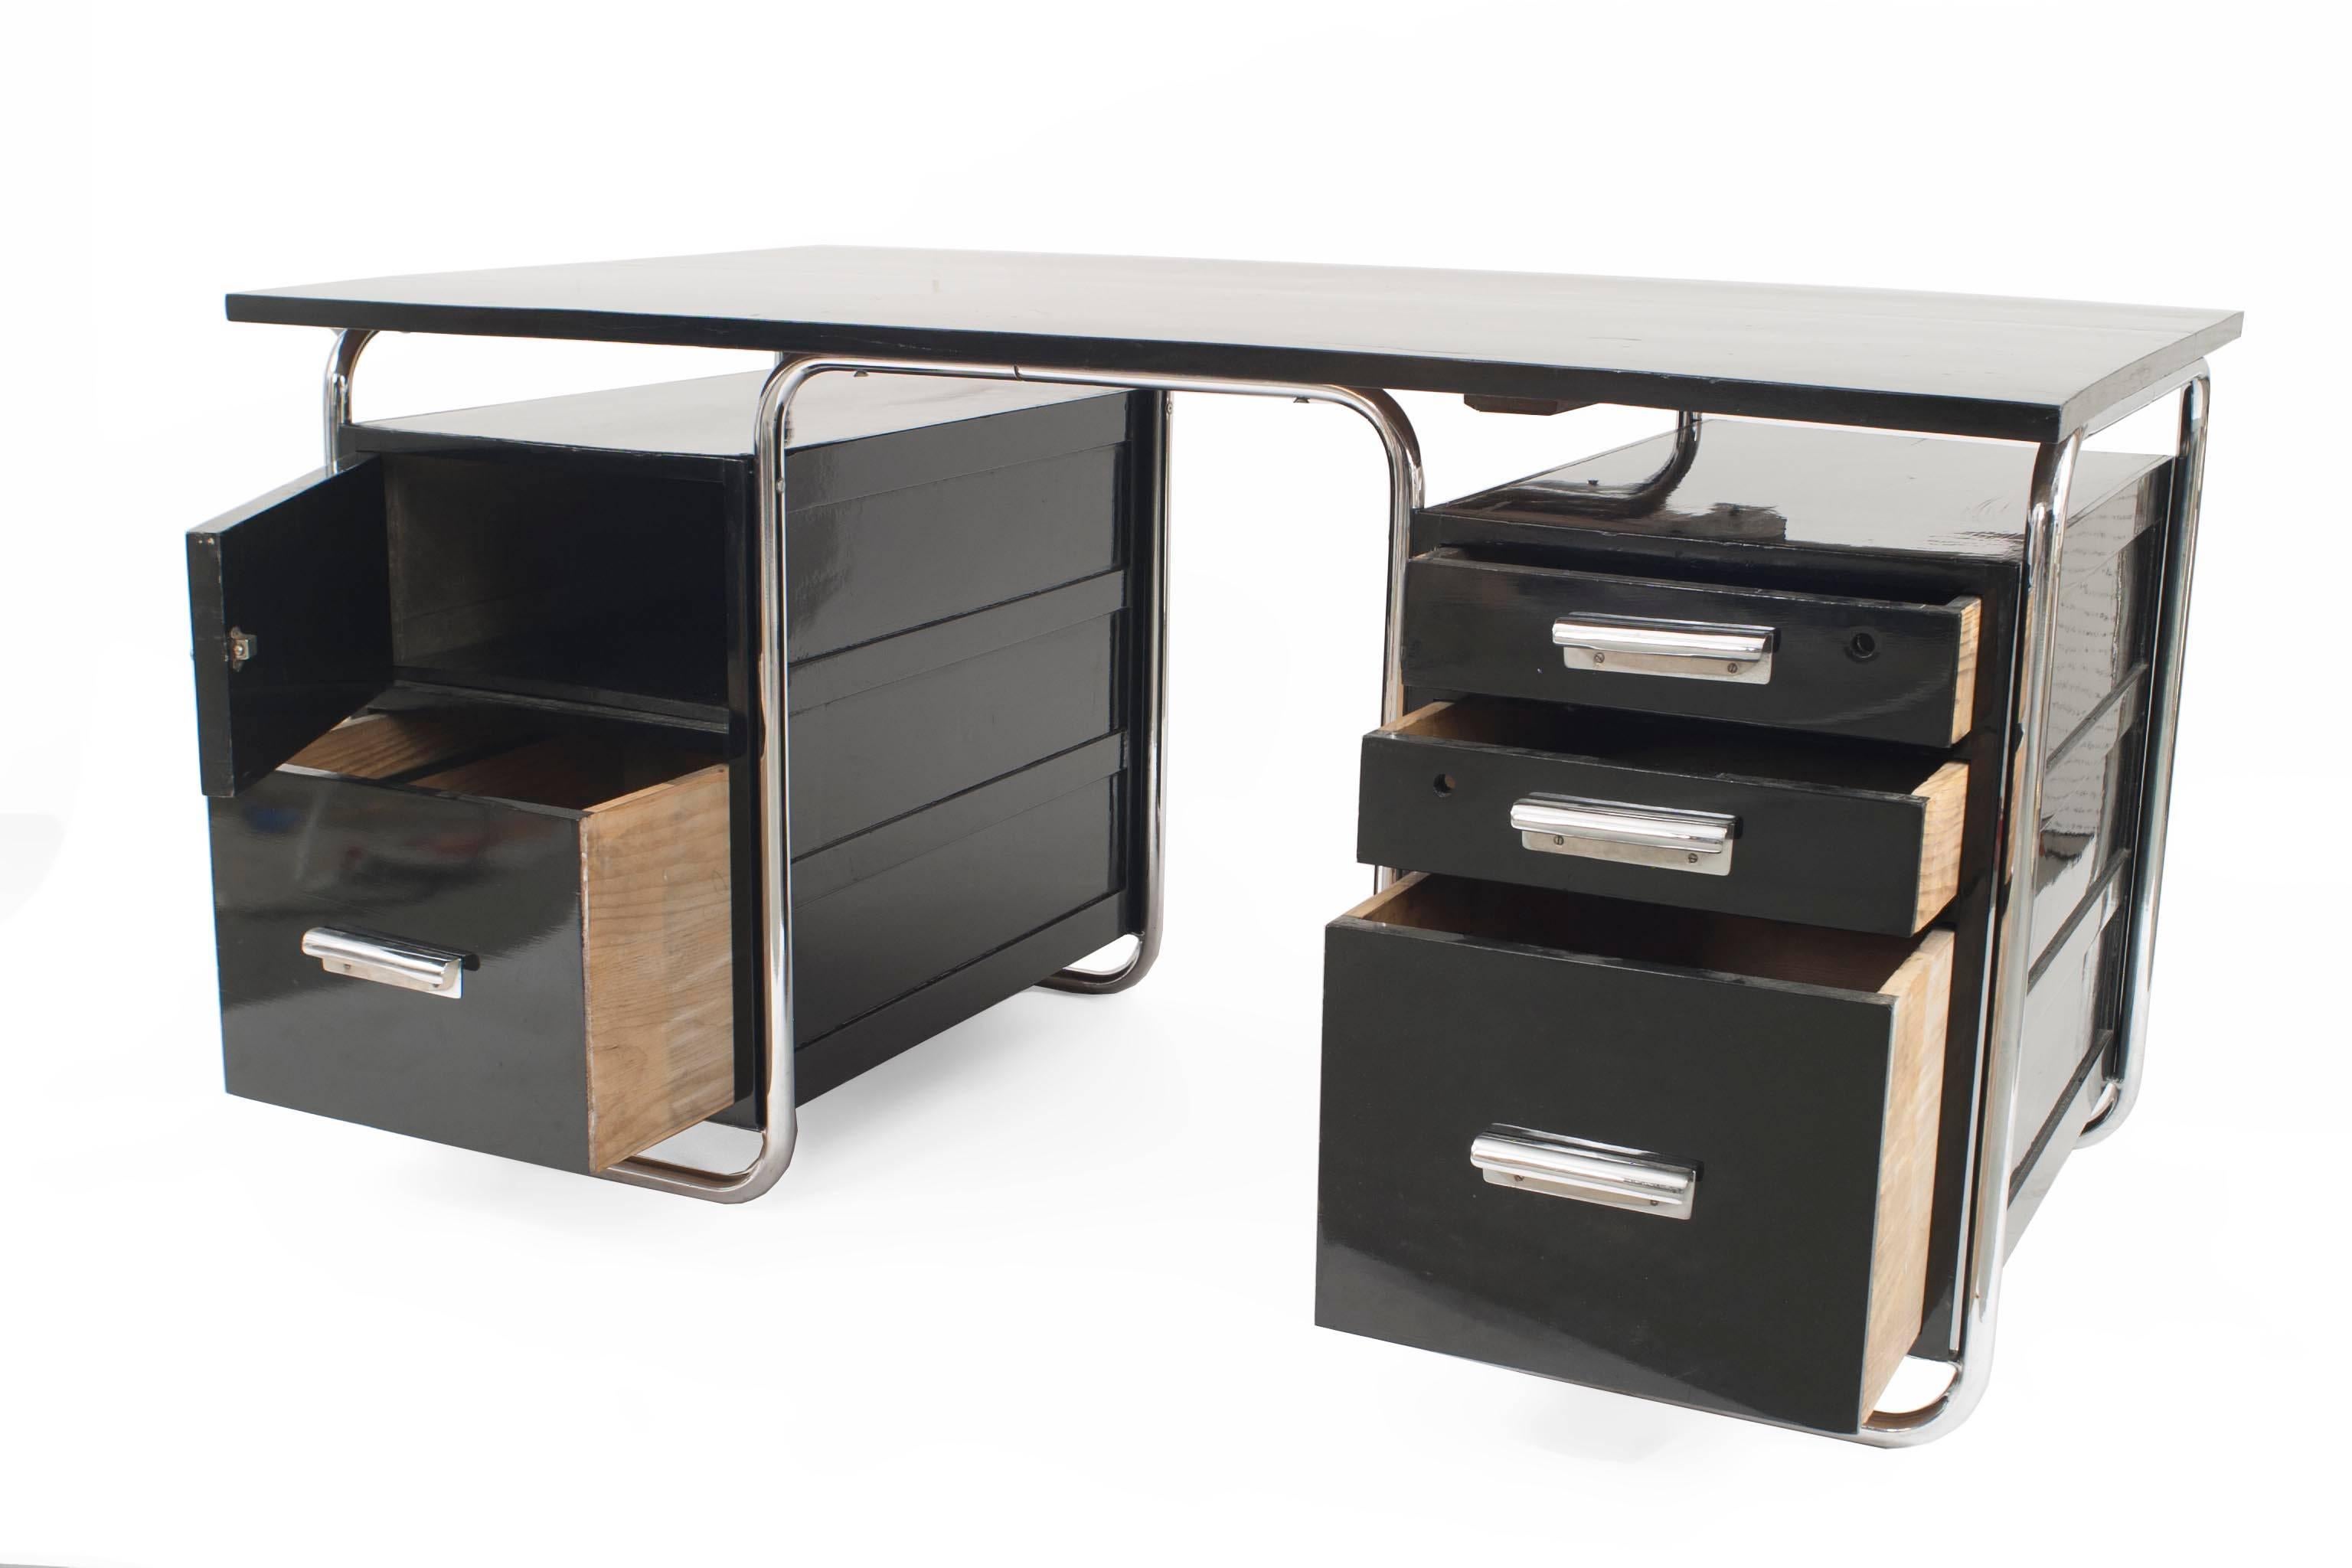 German Art Deco black enameled wood desk with chrome trim having a top floating over 2 sets of drawers (designed by MARCEL BREUER; mfg by THONET) (Related Item: 061133A)
